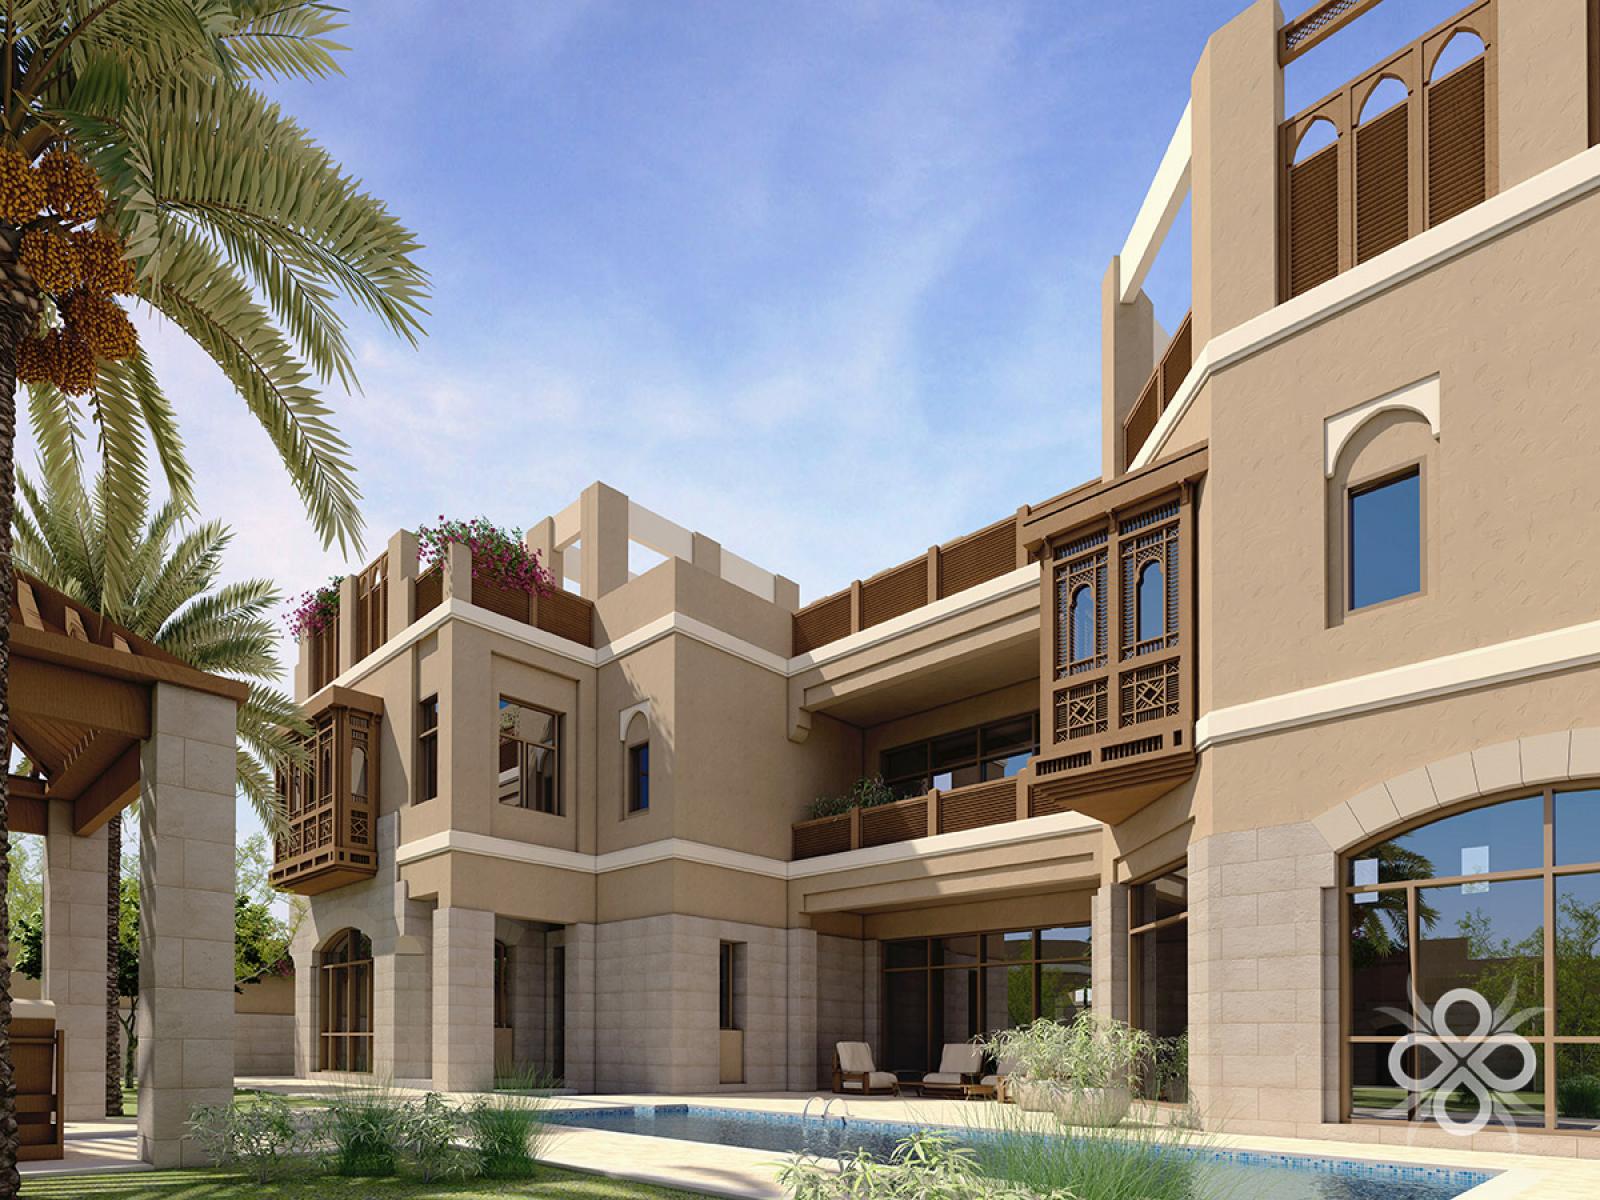 Residential Compound in Taif, KSA